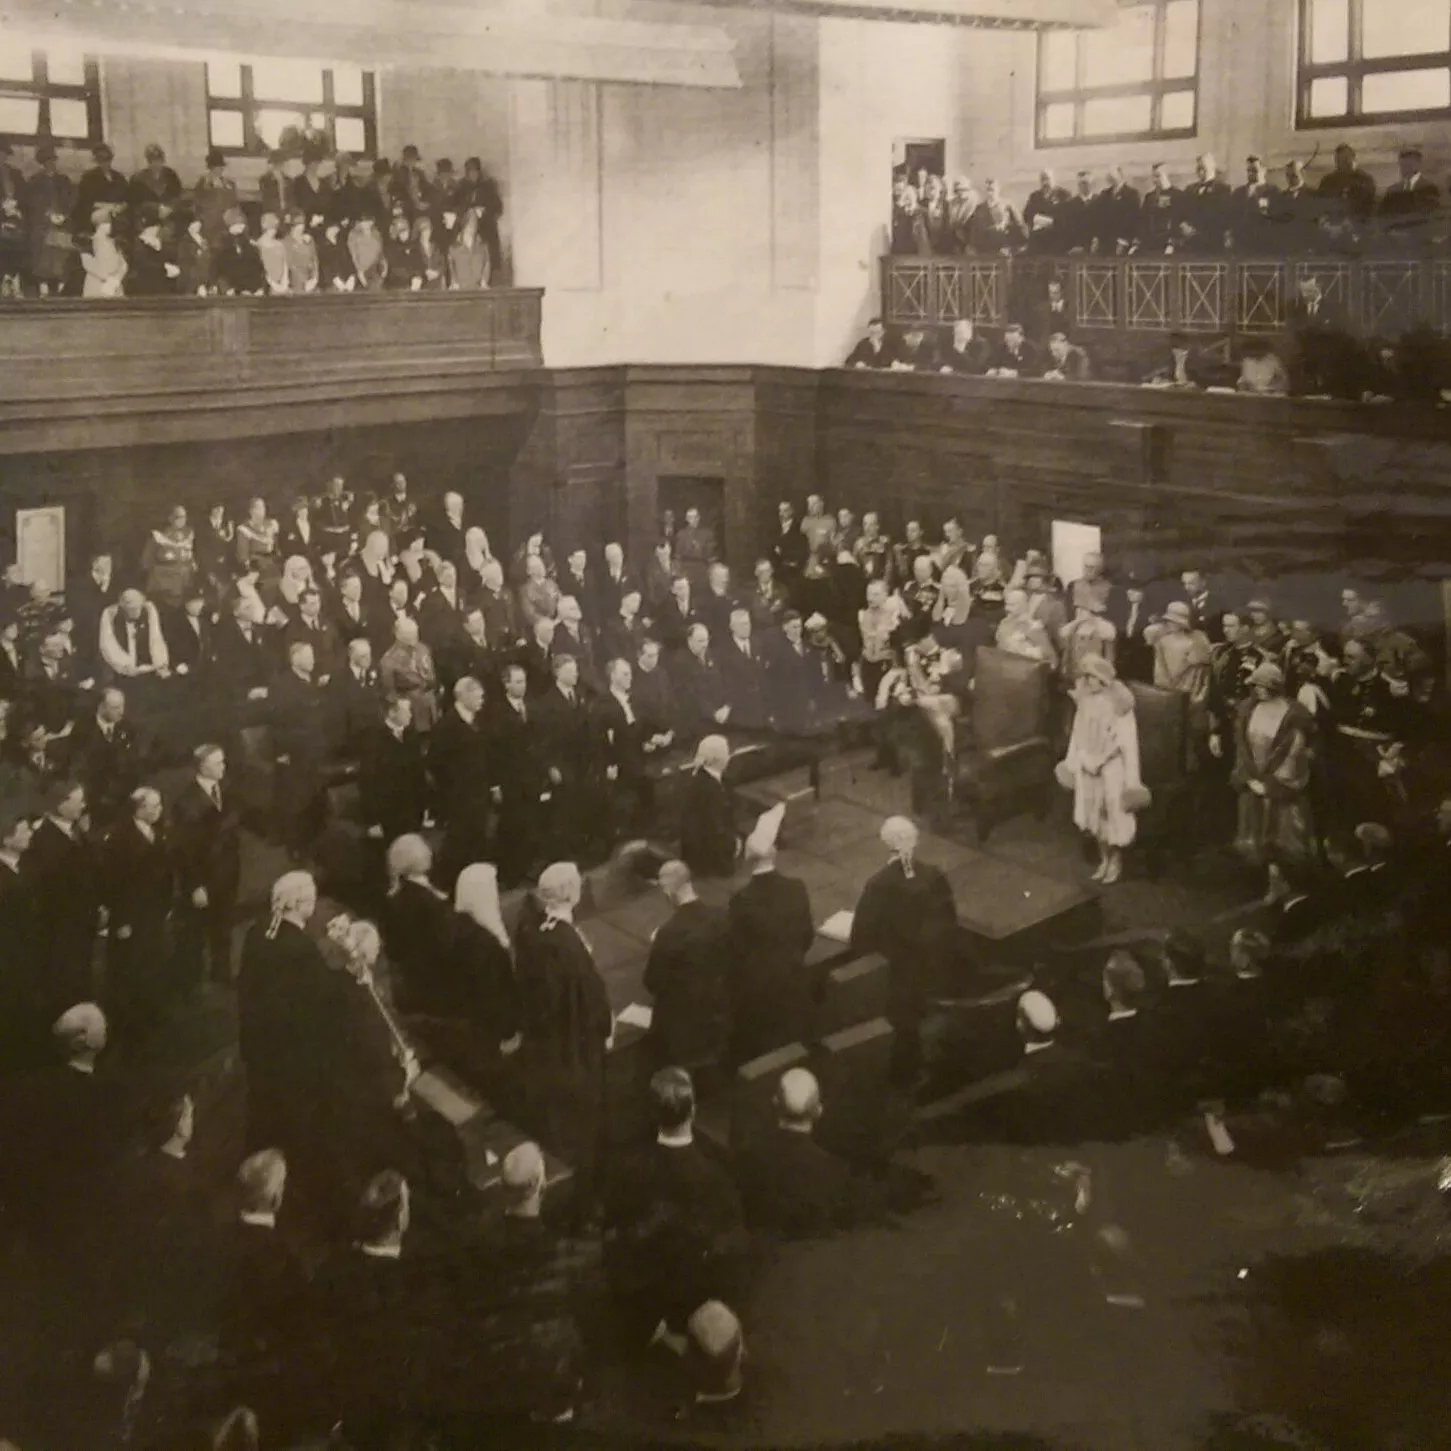 This black and white photograph shows the Duke of York reading a message from his father the King in the Senate Chamber. The room is crowded with at least 200 people, mostly men with some women all wearing their best. Men are dressed in suits, military uniform or gowns and wigs while the women wear formal dresses with hats and gloves. The crowd is in a horseshoe shape around the central table while the Duke stands at the head of the table.